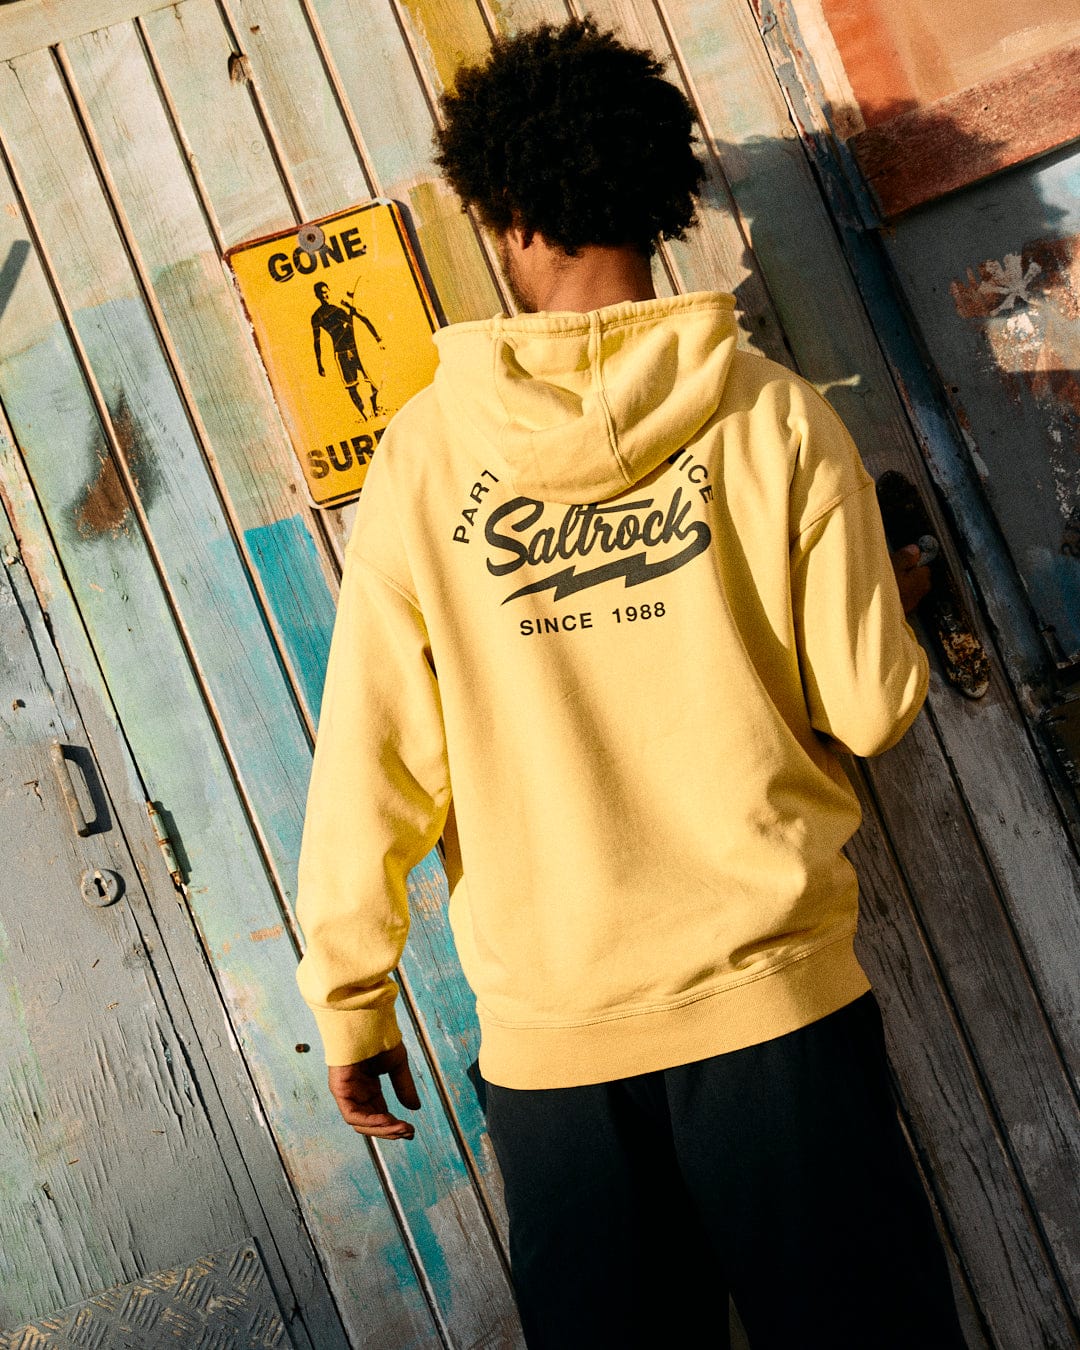 A person in a yellow Saltrock Gas Station - Recycled Mens Pop Hoodie stands in front of a colorful wooden wall with a "gone surfing" sign.